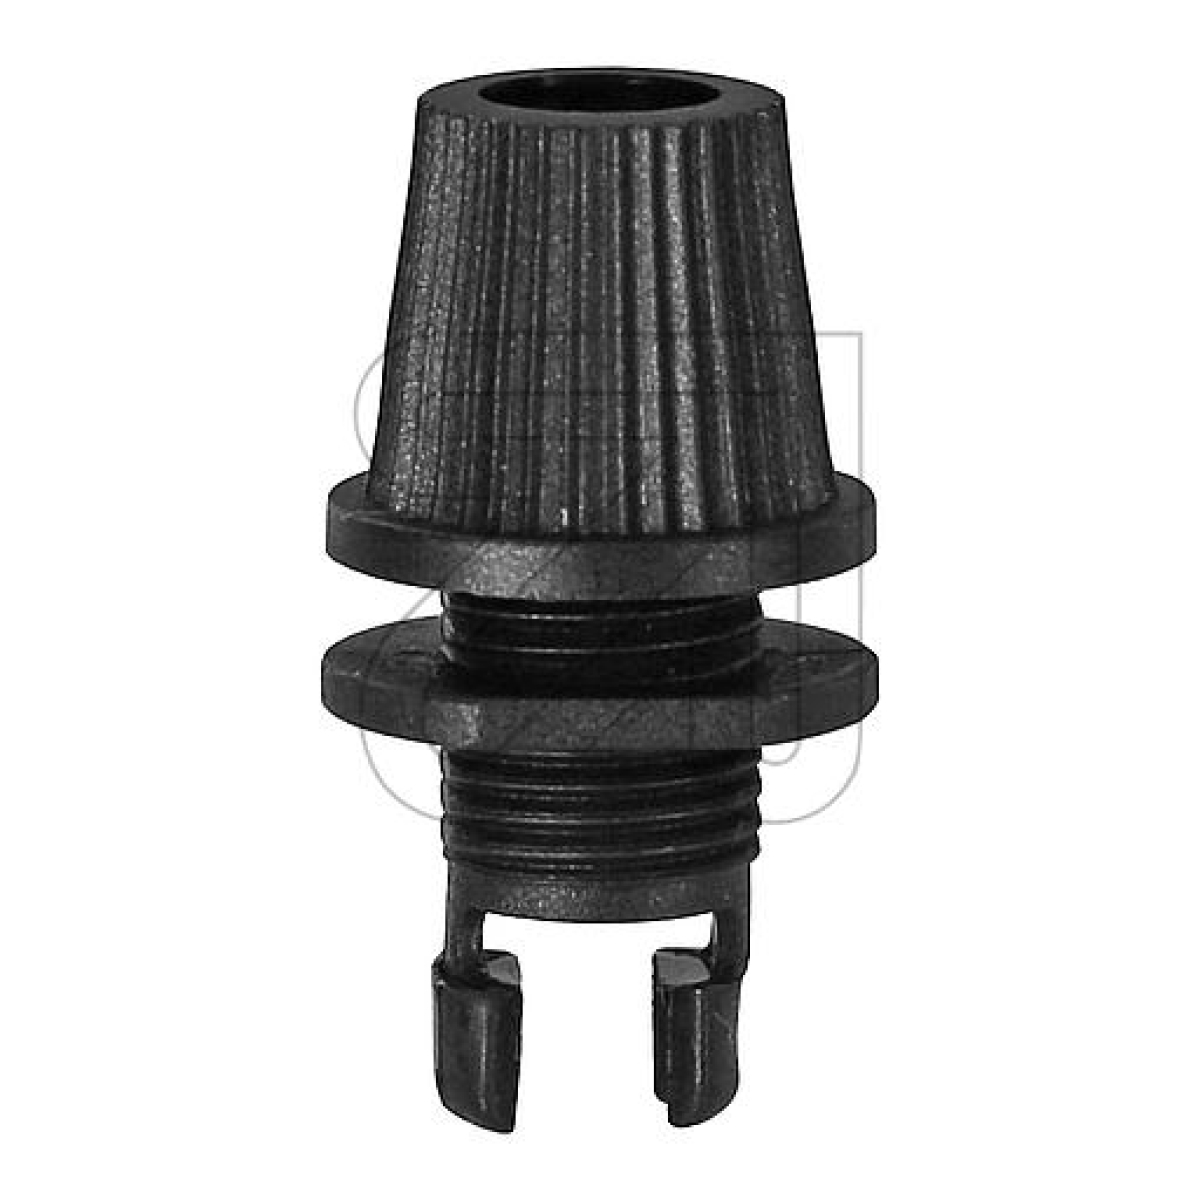 D. W. BendlerClamping nipple with union nut black 2239.0101.0007.4123-Price for 10 pcs.